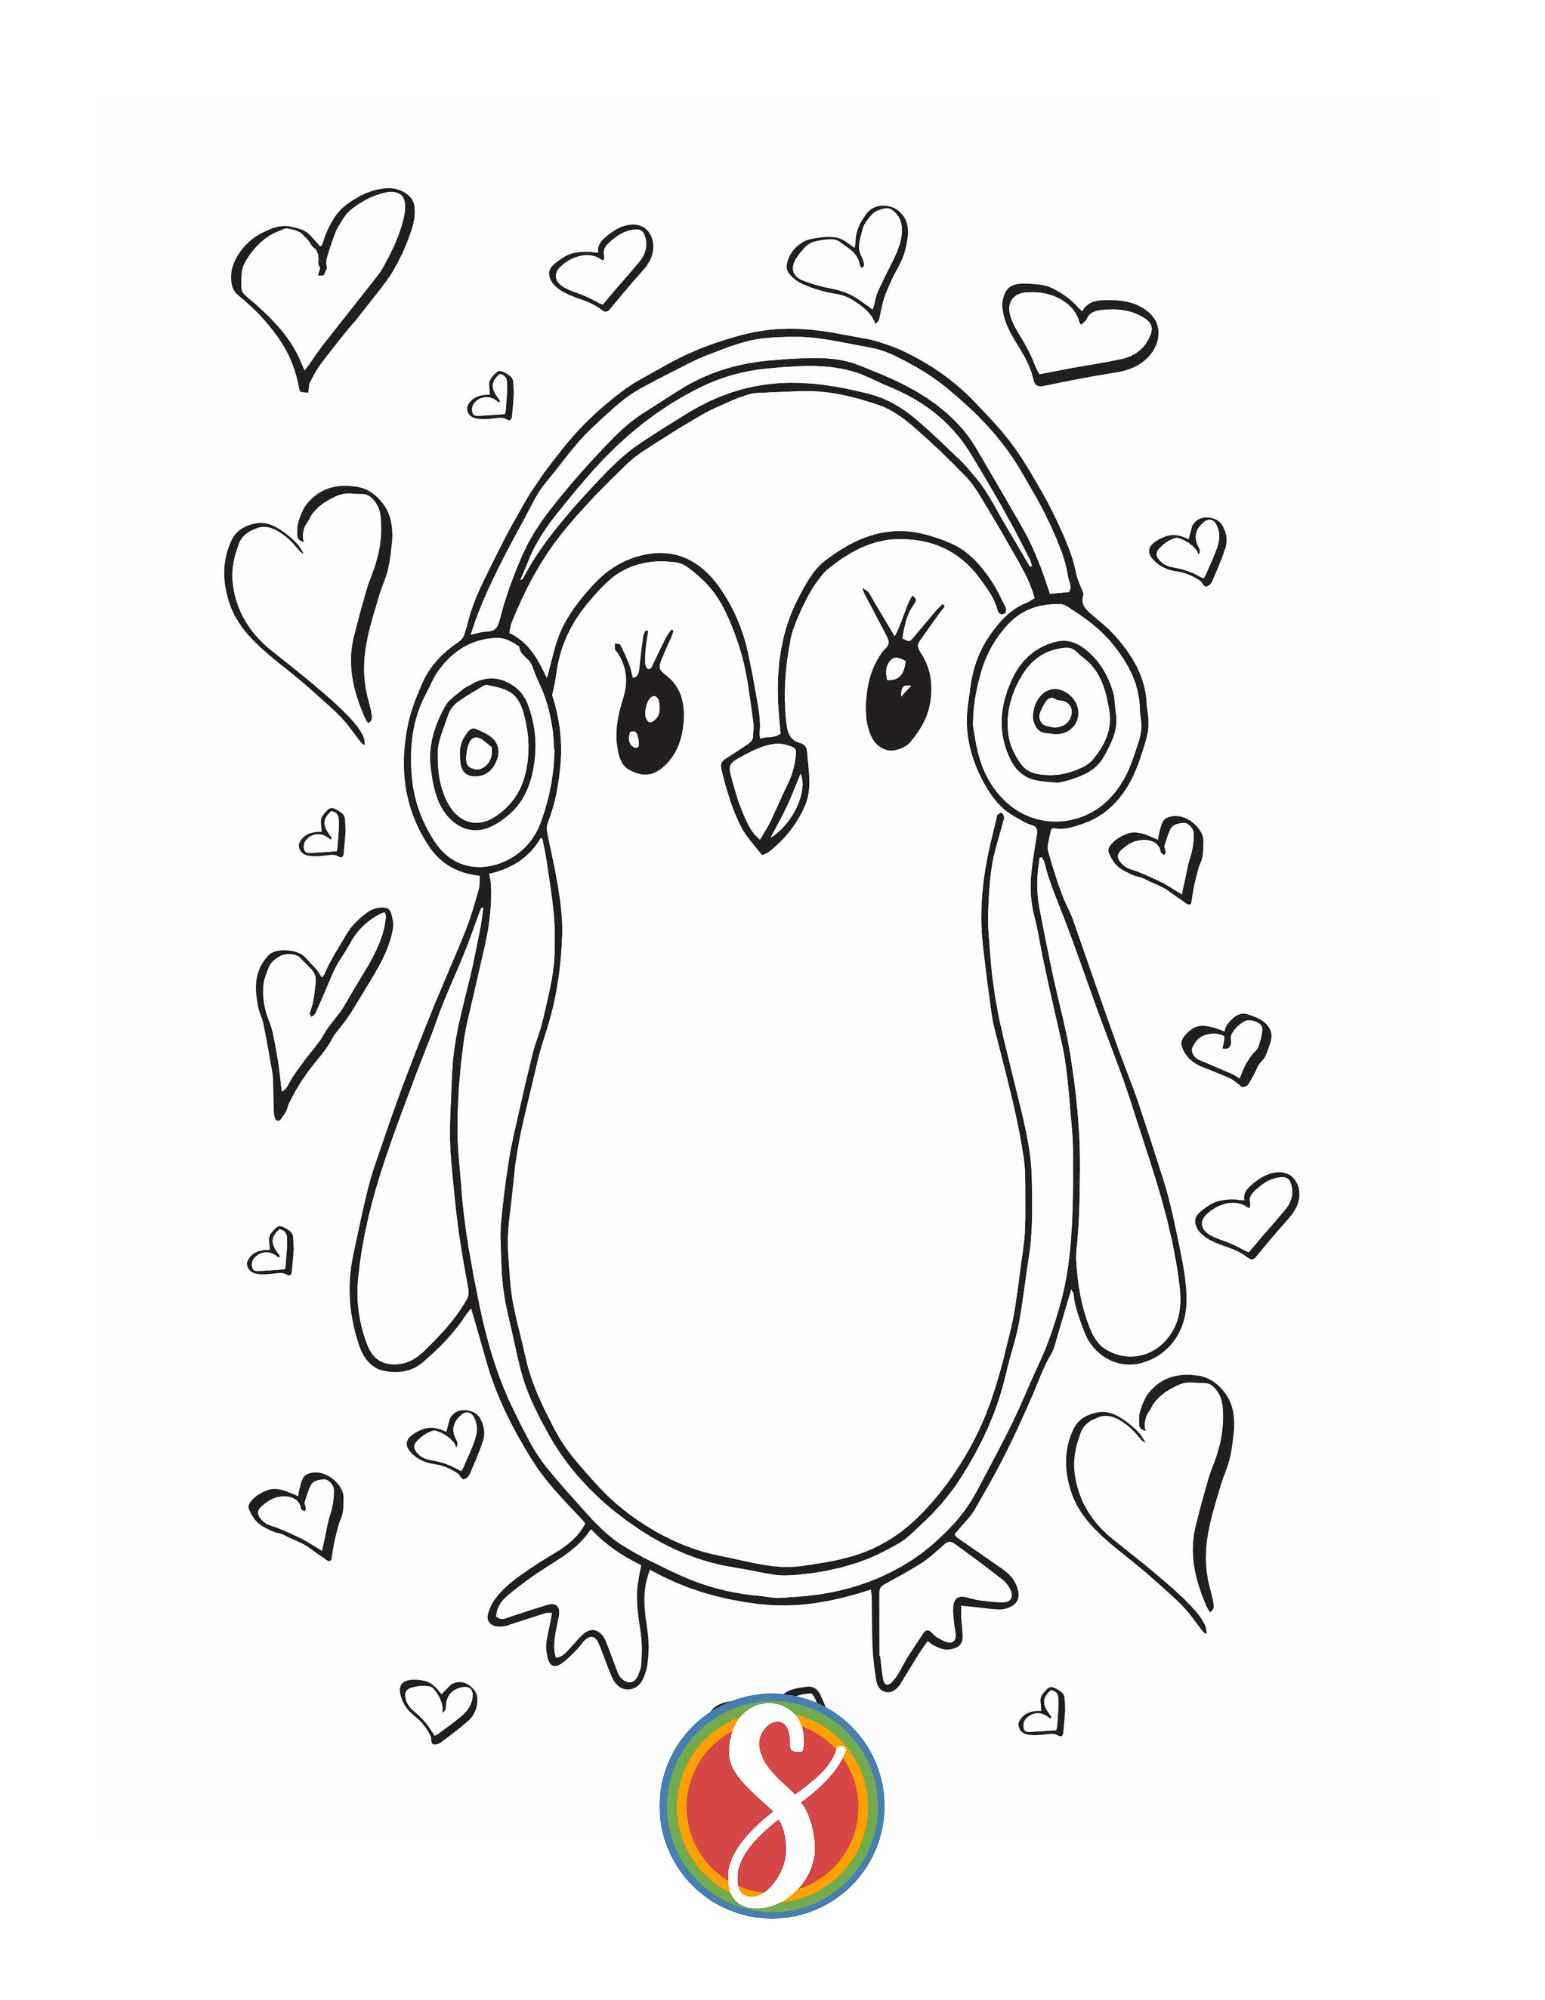 a simple, cute colorable penguin image with a penguin wearing headphones and colorable hearts all around